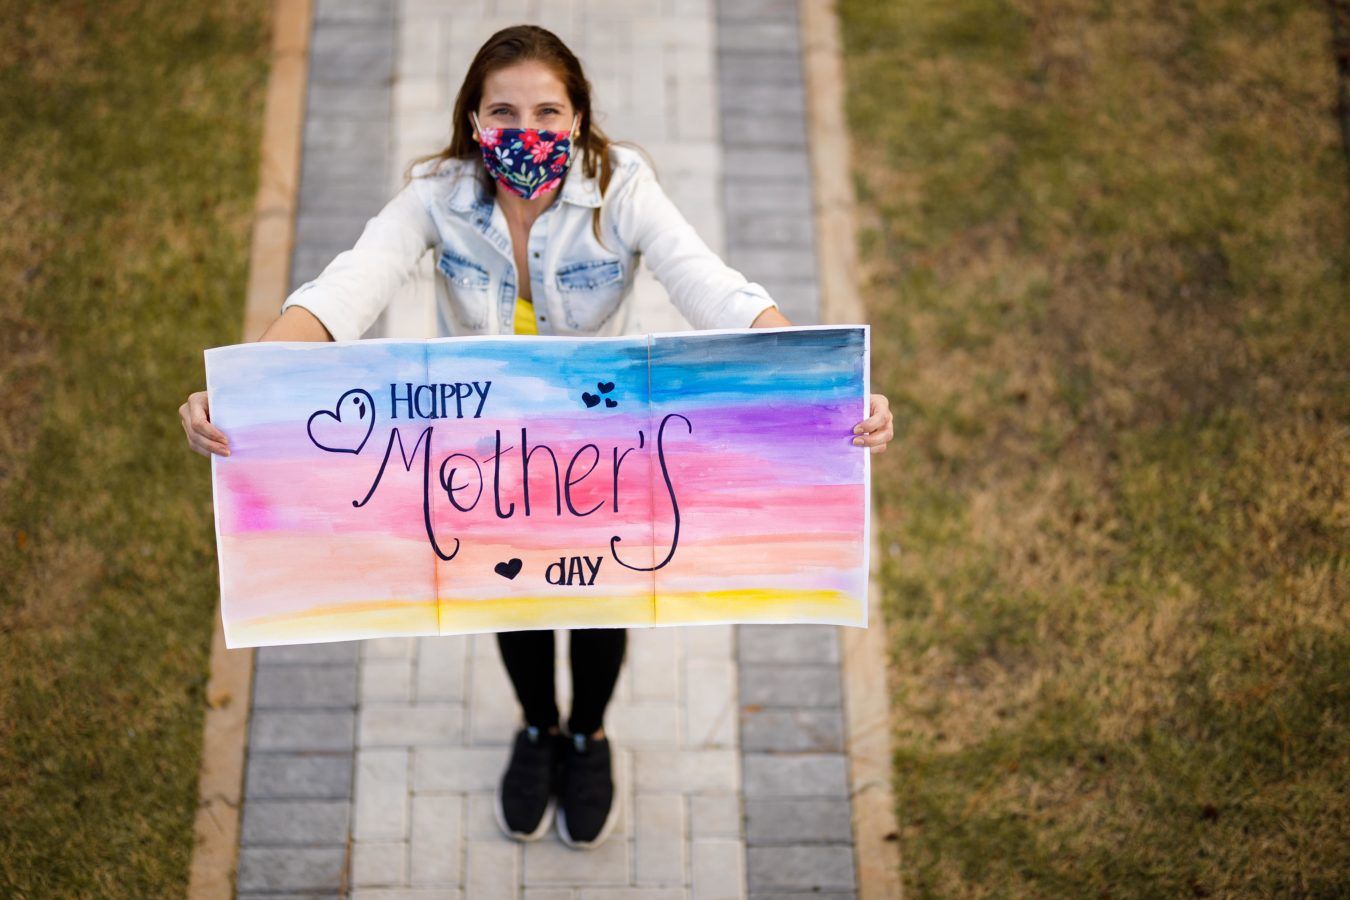 Mother’s Day 2021: Goodwill gifts your mother would approve of 100%